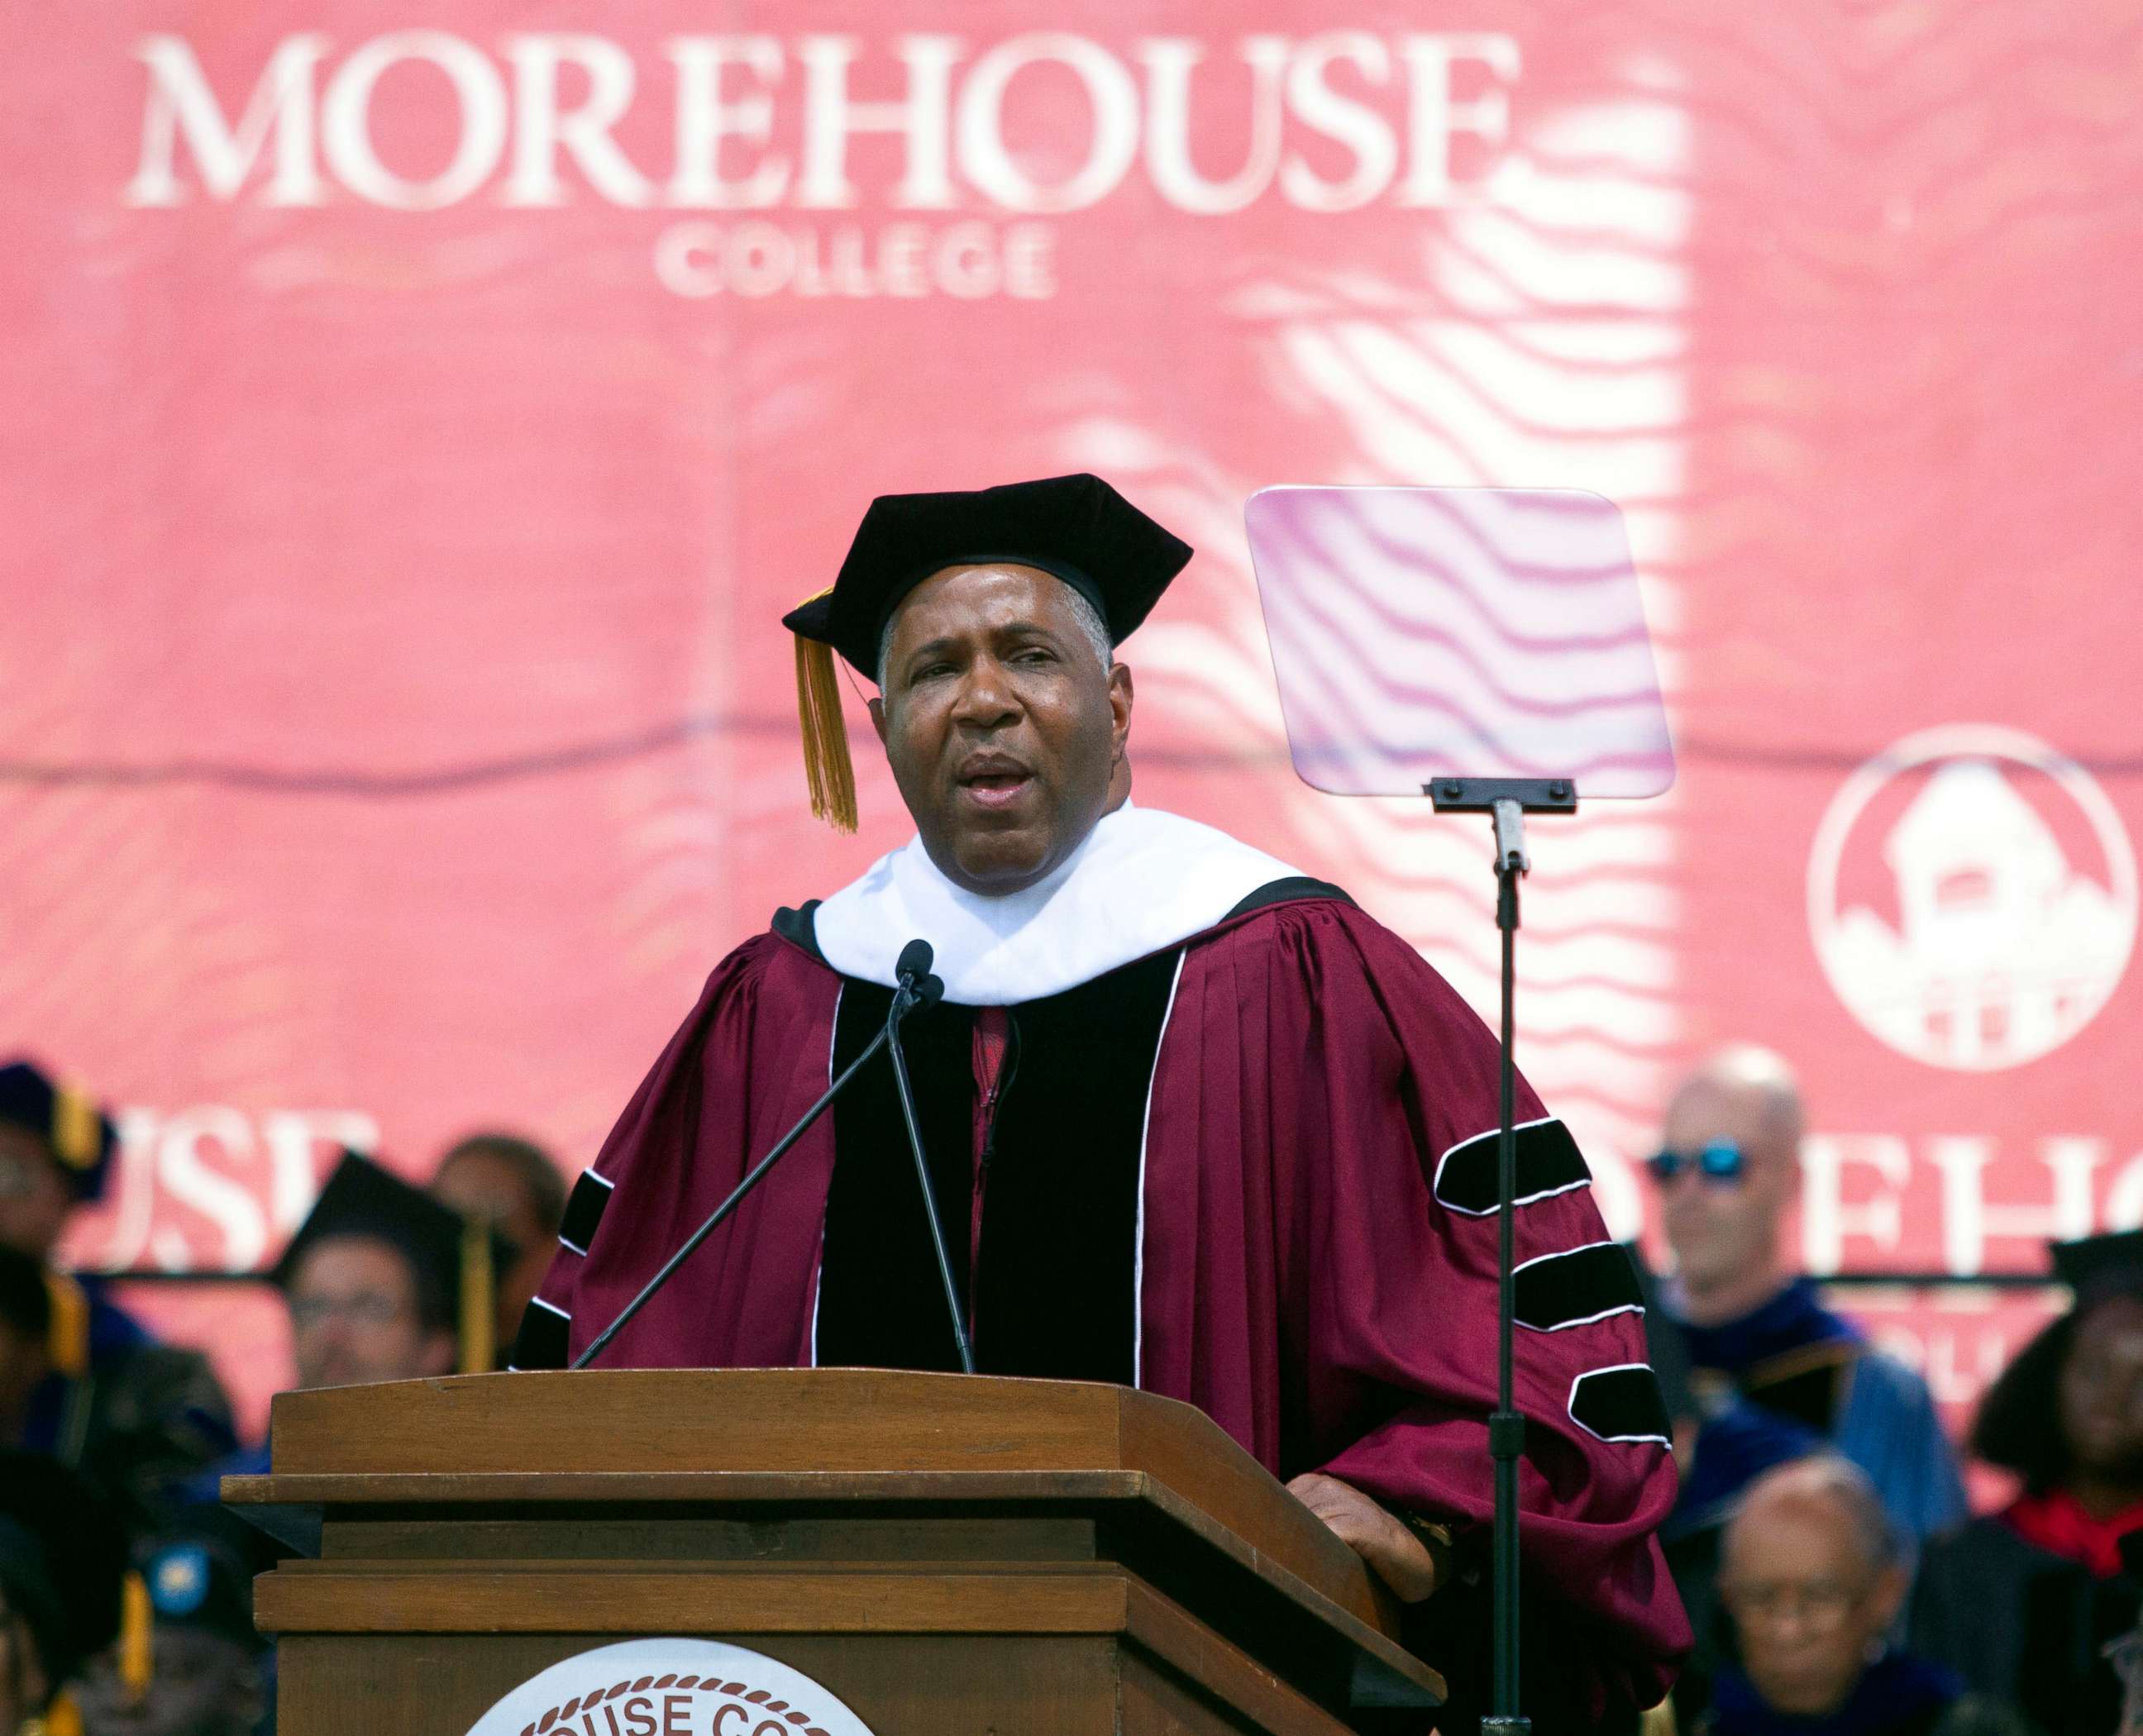 PHOTO: Billionaire technology investor and philanthropist Robert F. Smith announces he will provide grants to wipe out the student debt of the entire 2019 graduating class at Morehouse College in Atlanta, May 19, 2019.